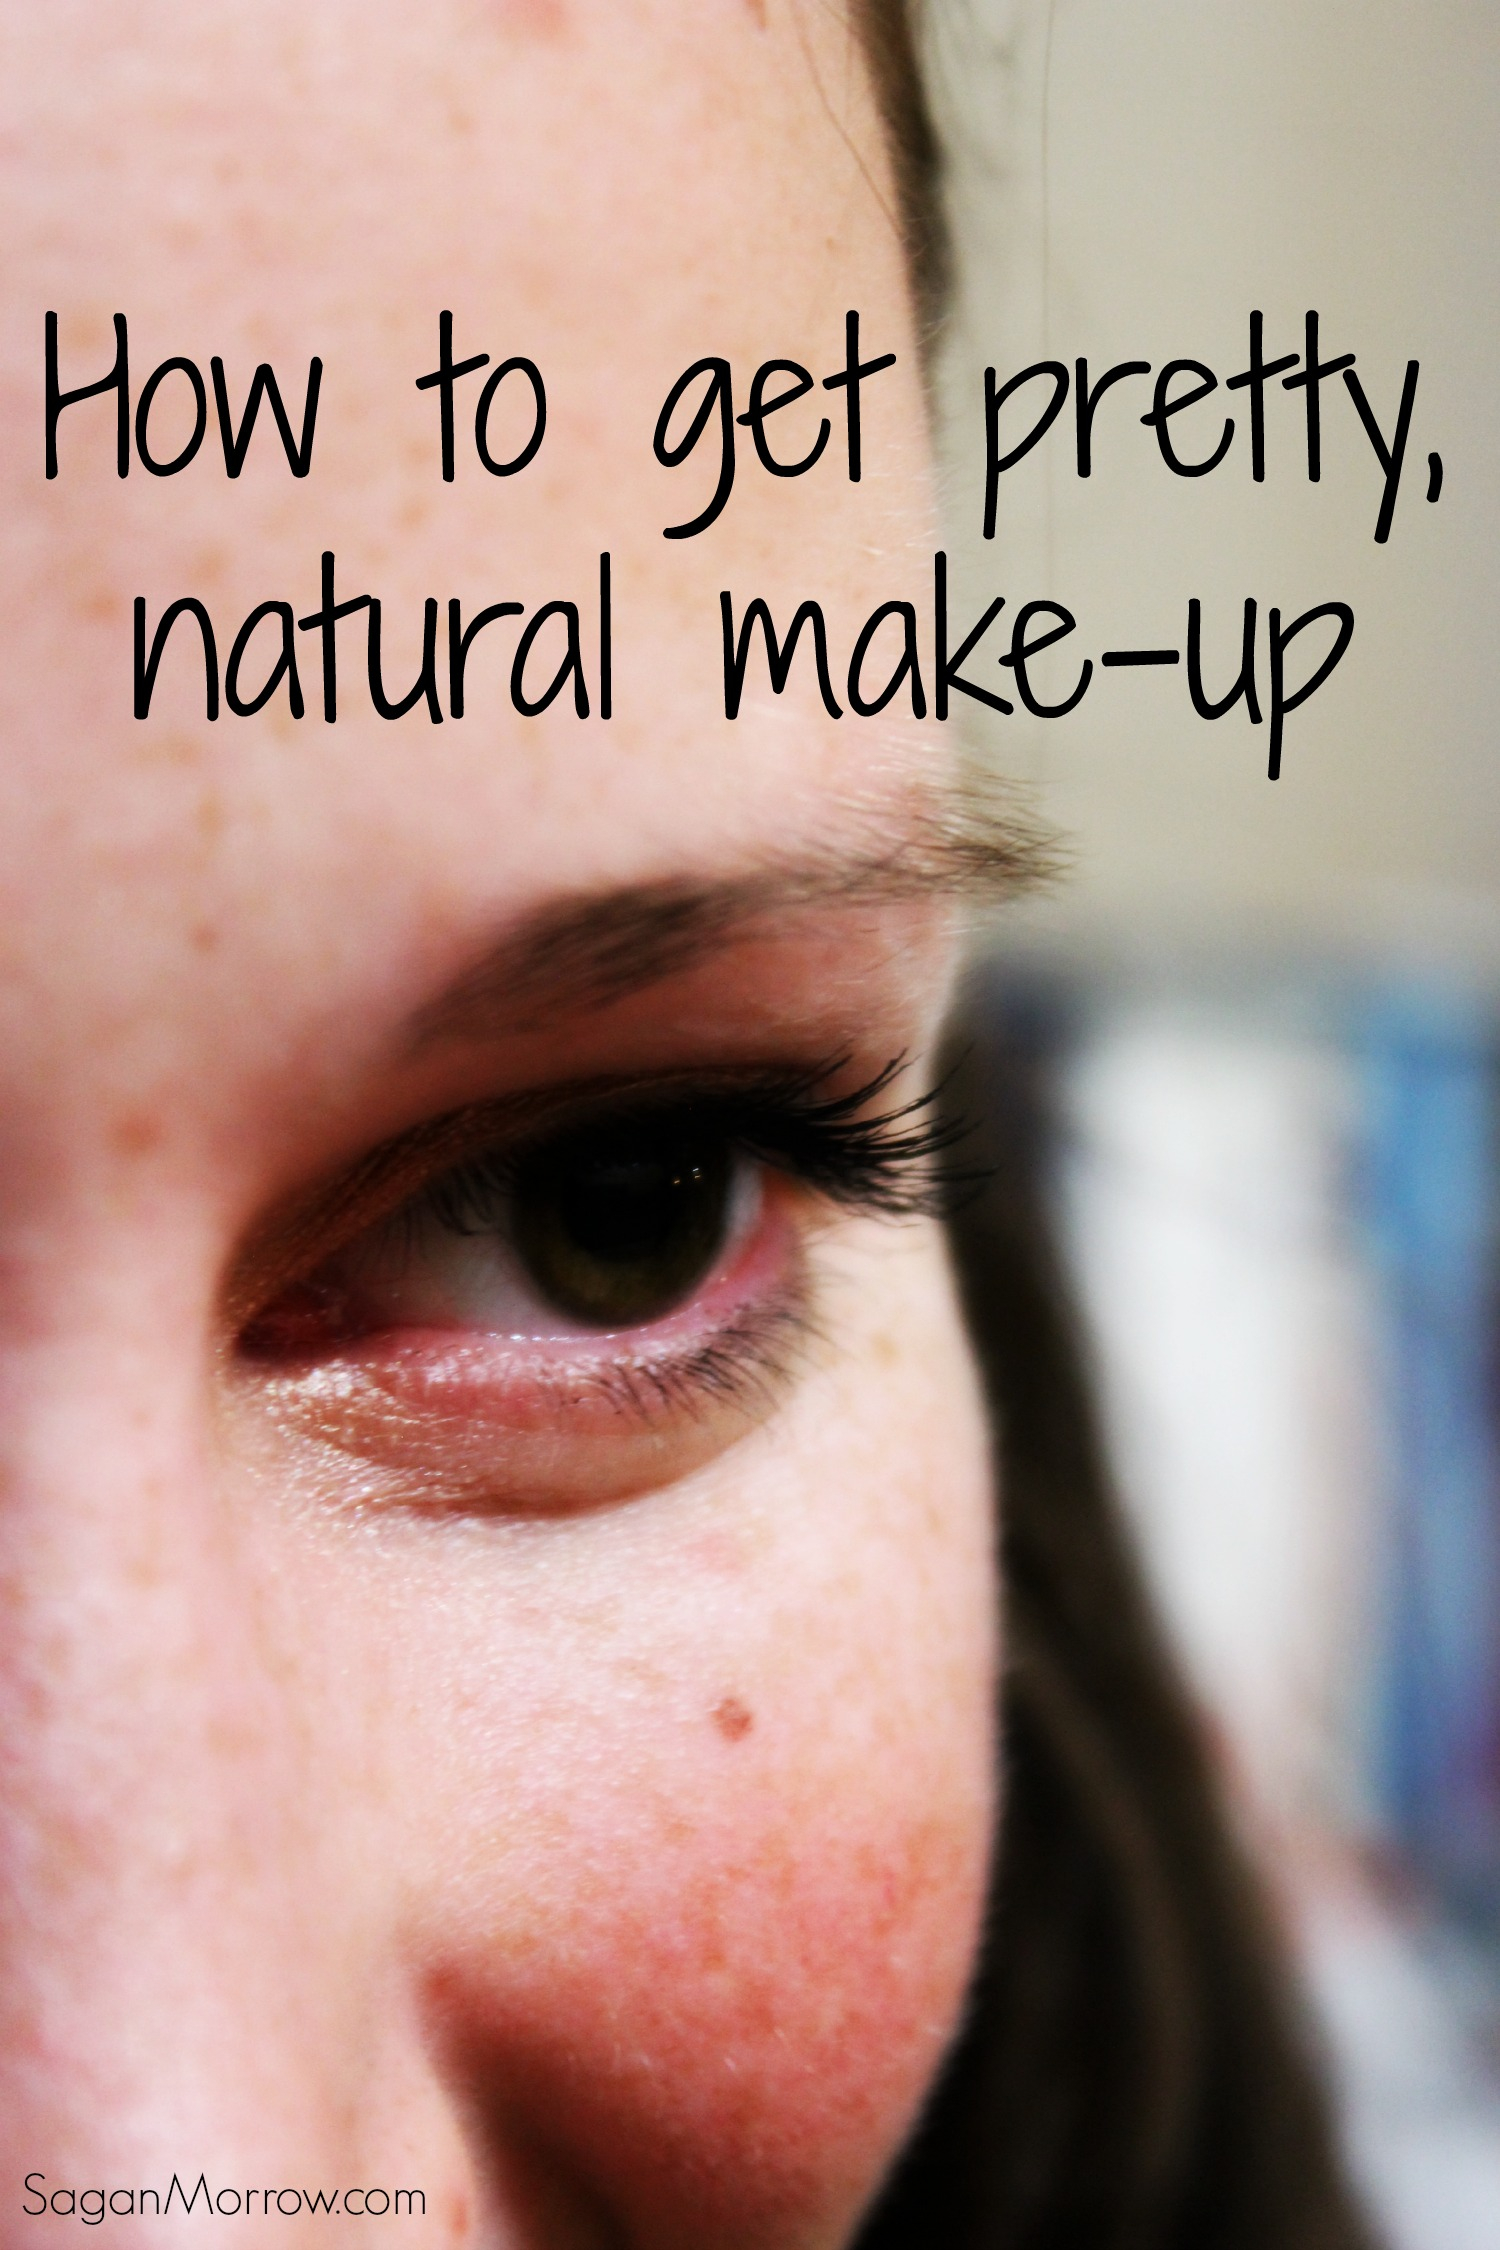 How To Do Natural Eye Makeup How To Get Pretty Natural Eye Makeup Step Step In Photos